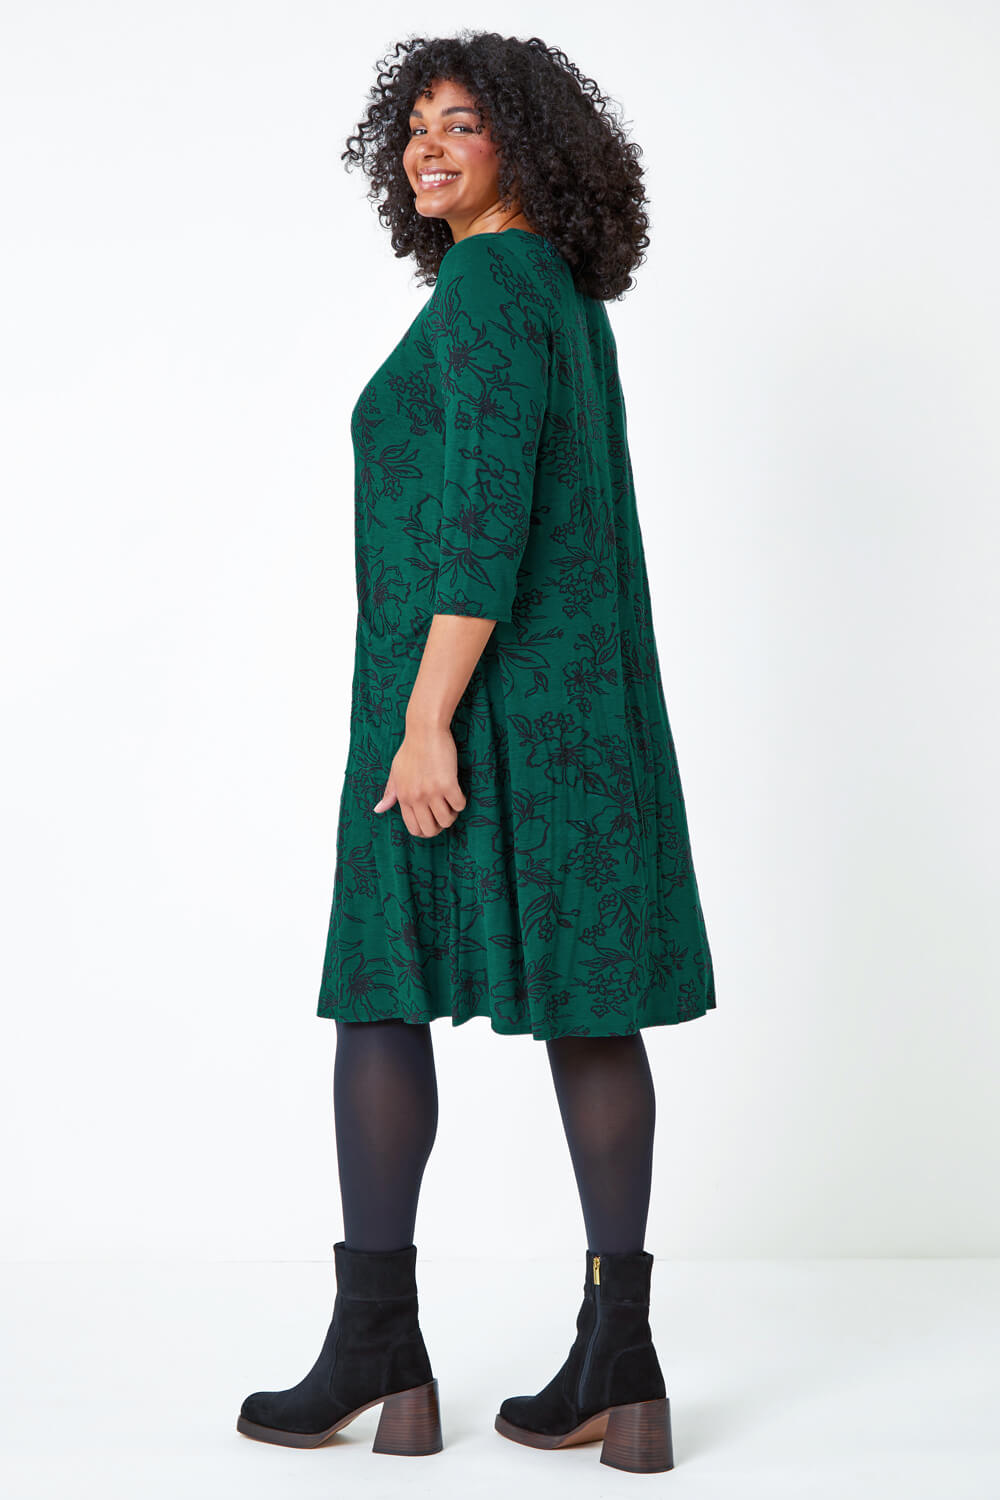 Green Curve Floral Print Swing Stretch Dress, Image 3 of 5